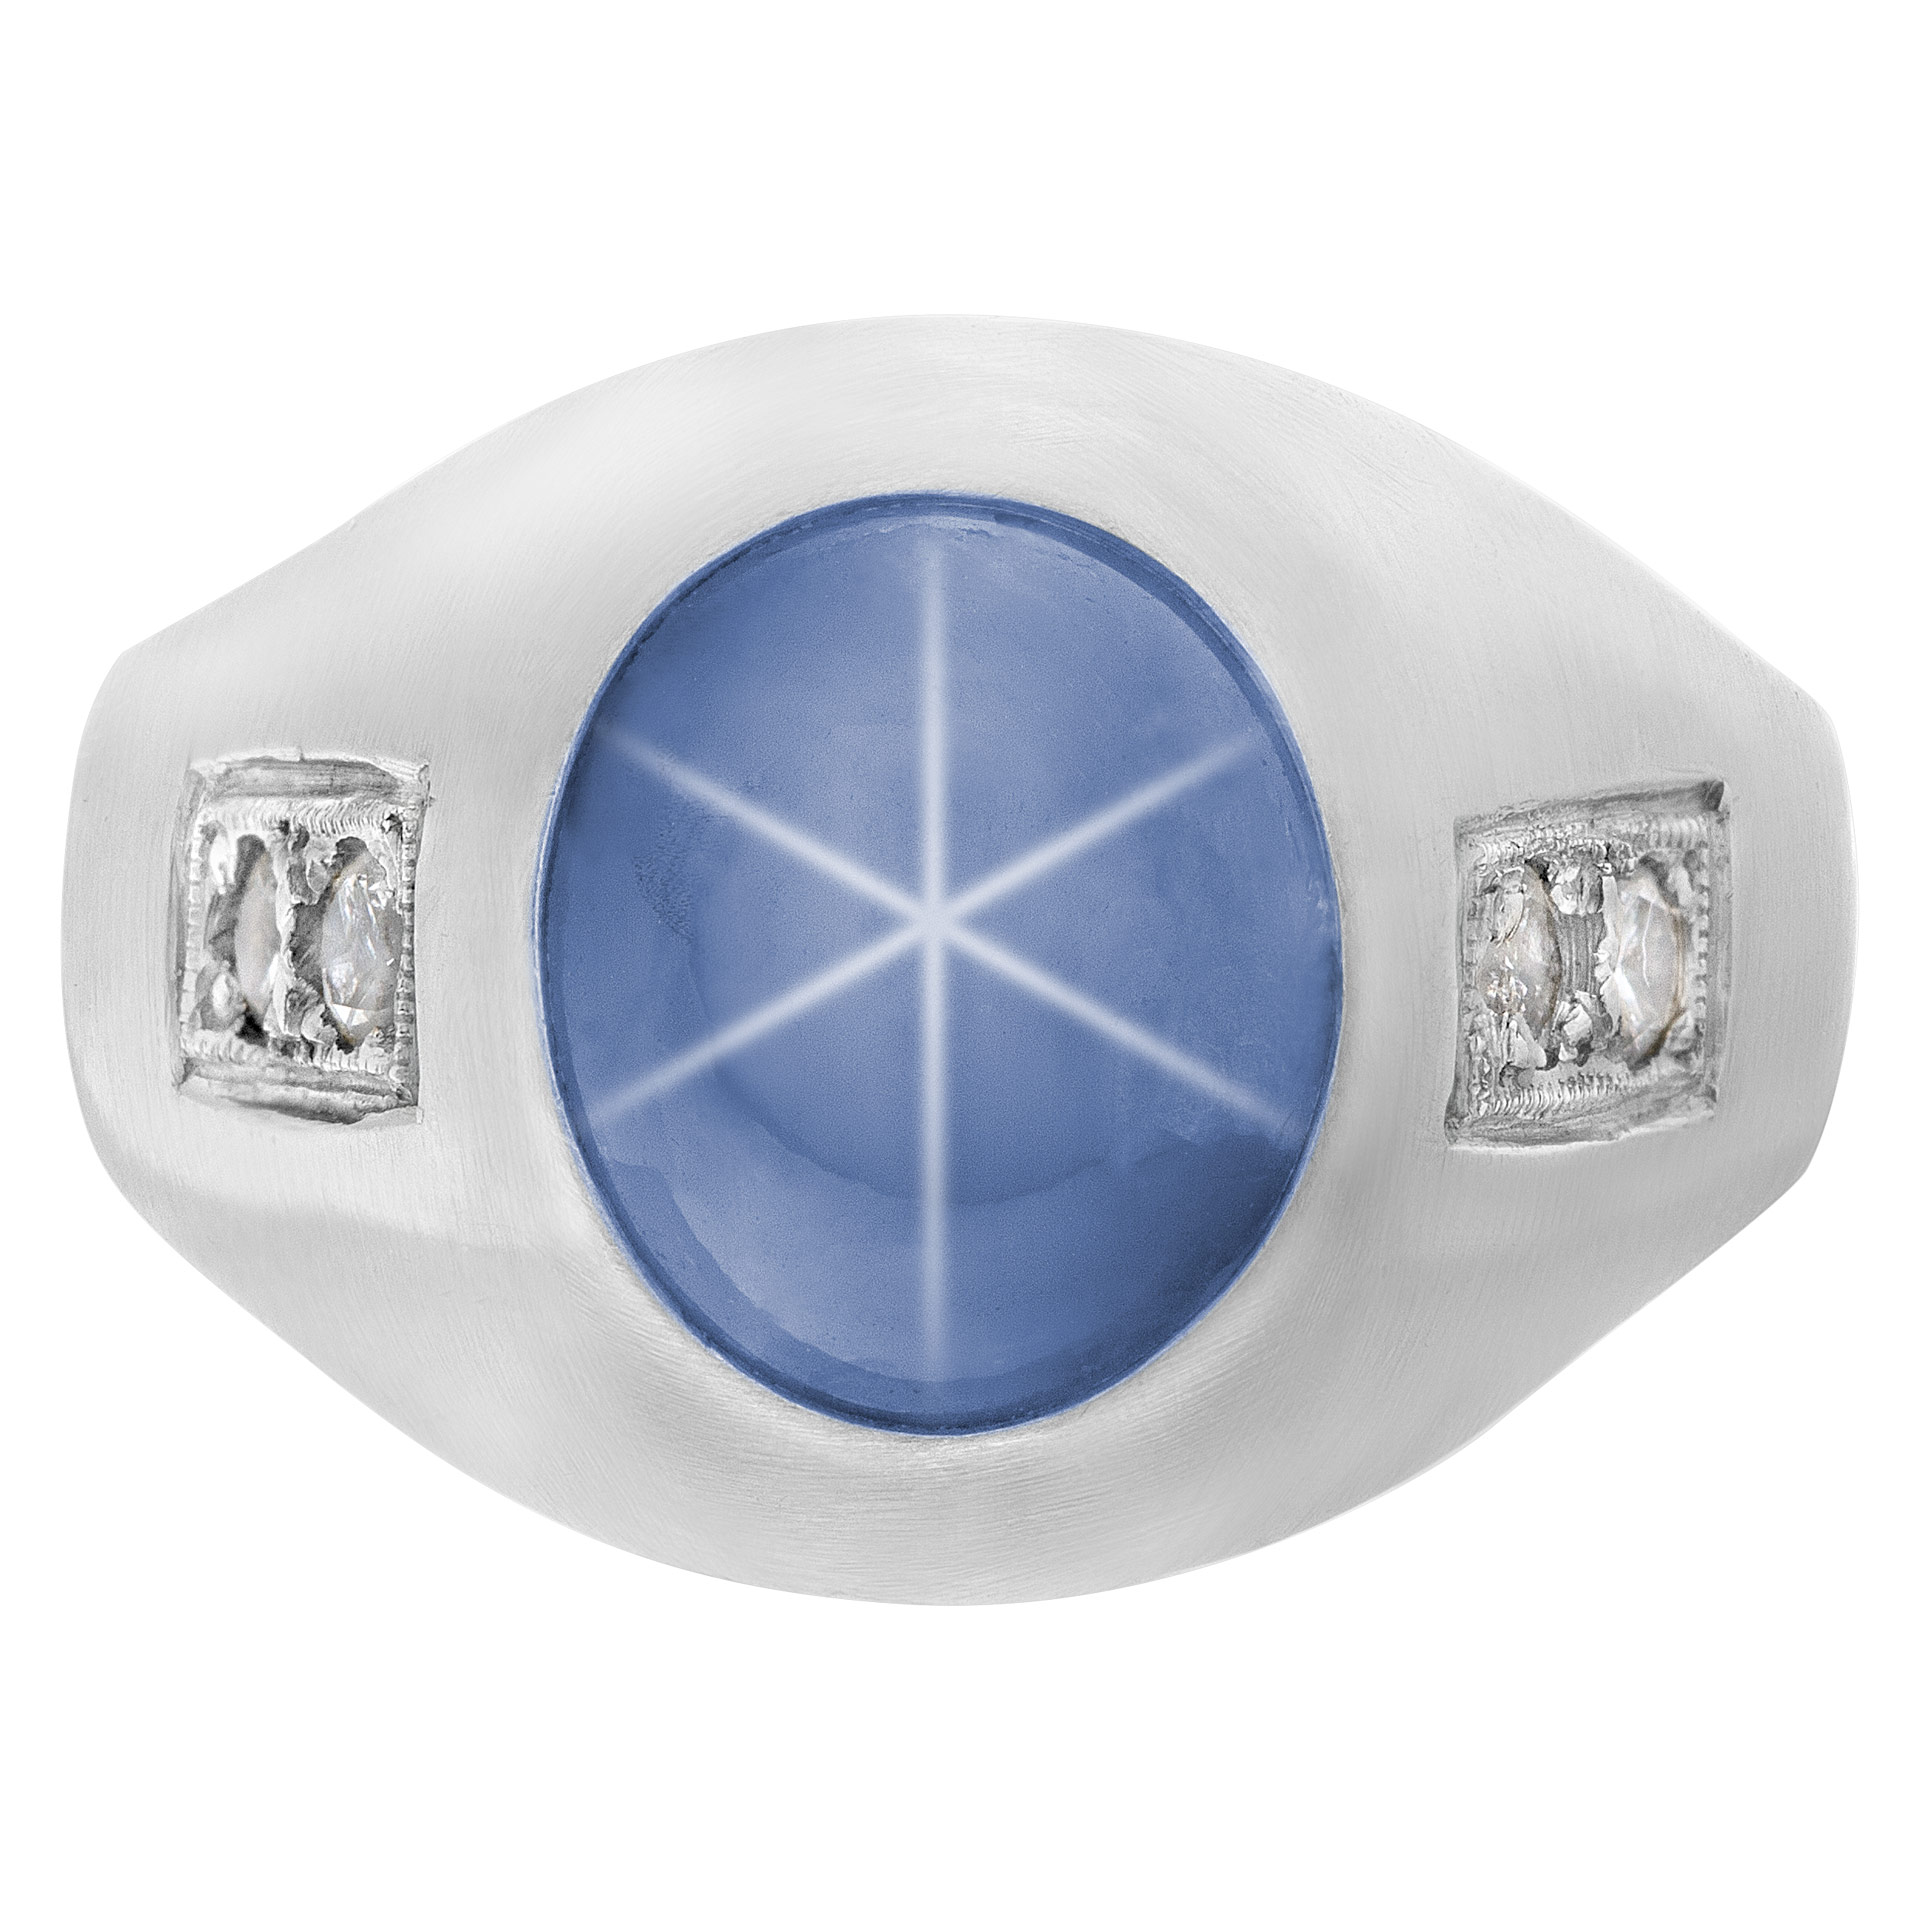 Star Sapphire ring in 14k white gold with diamond accents